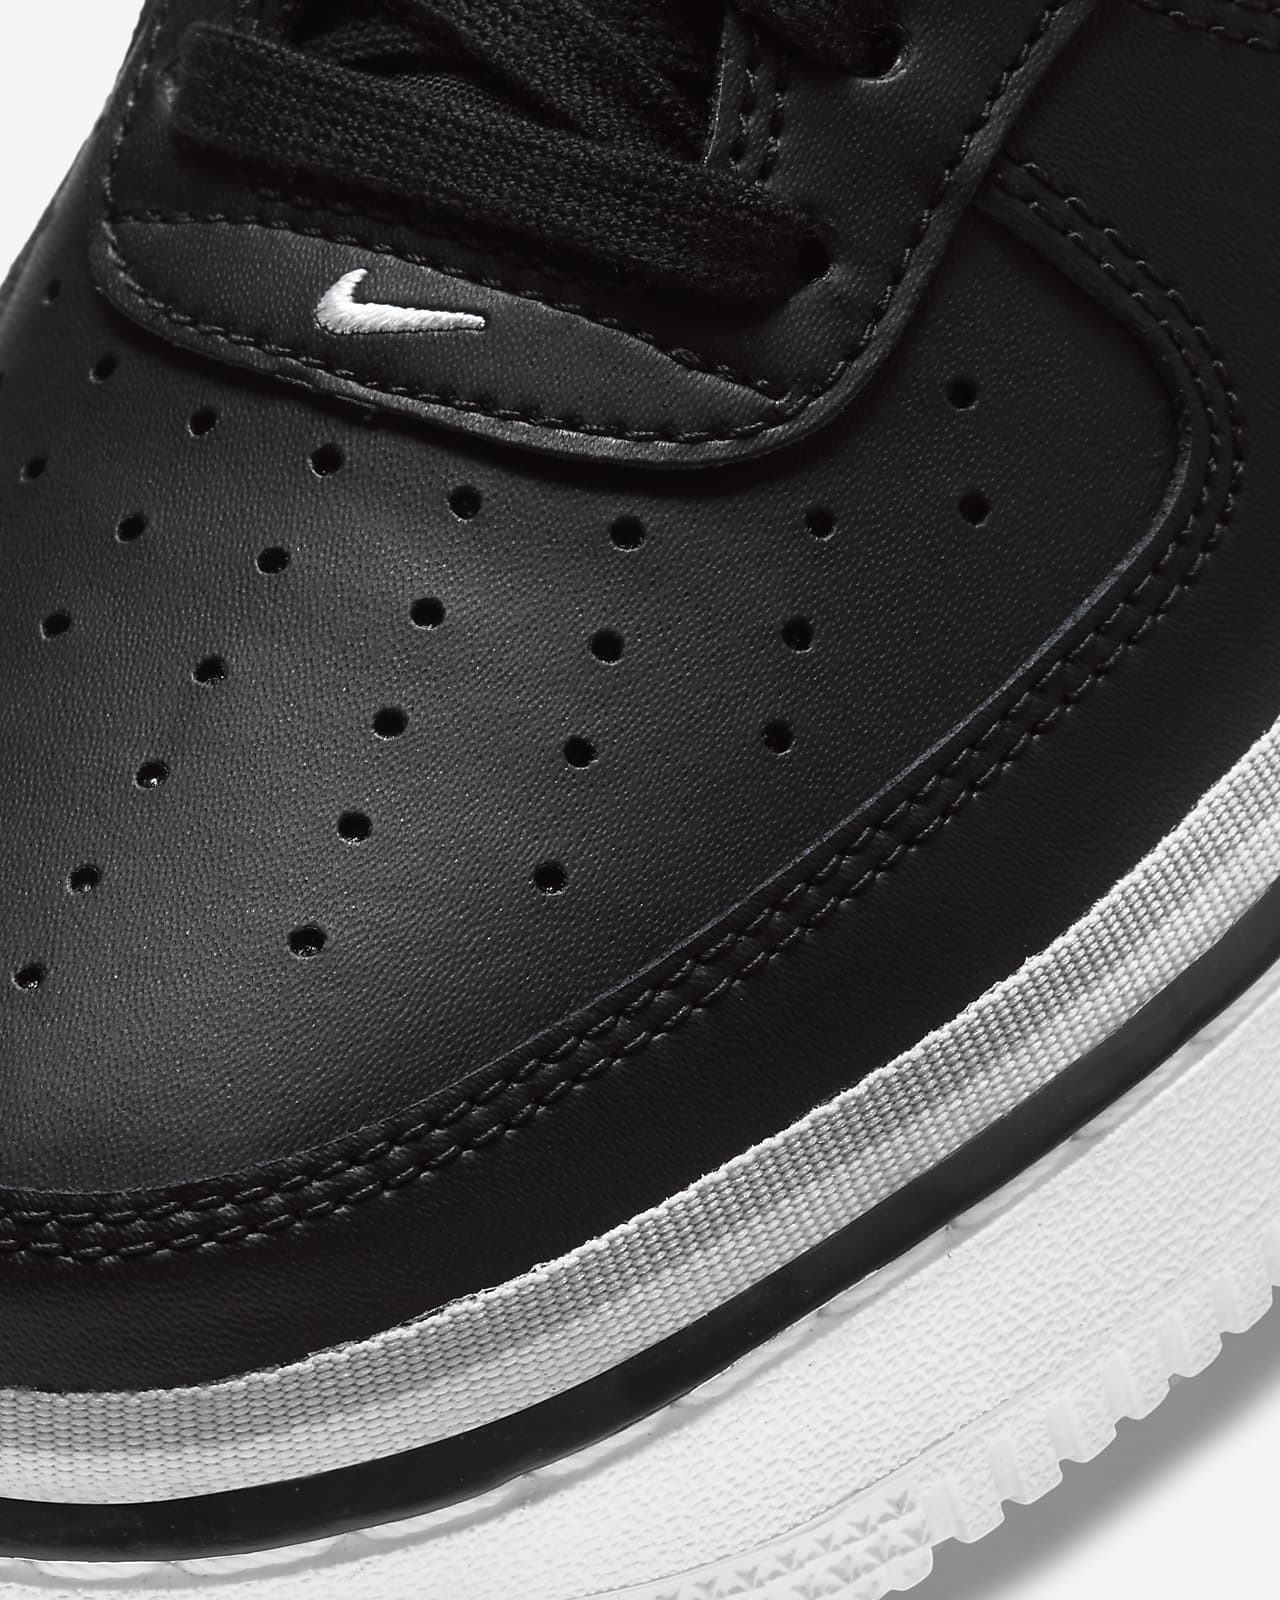 gray and black nike air force 1